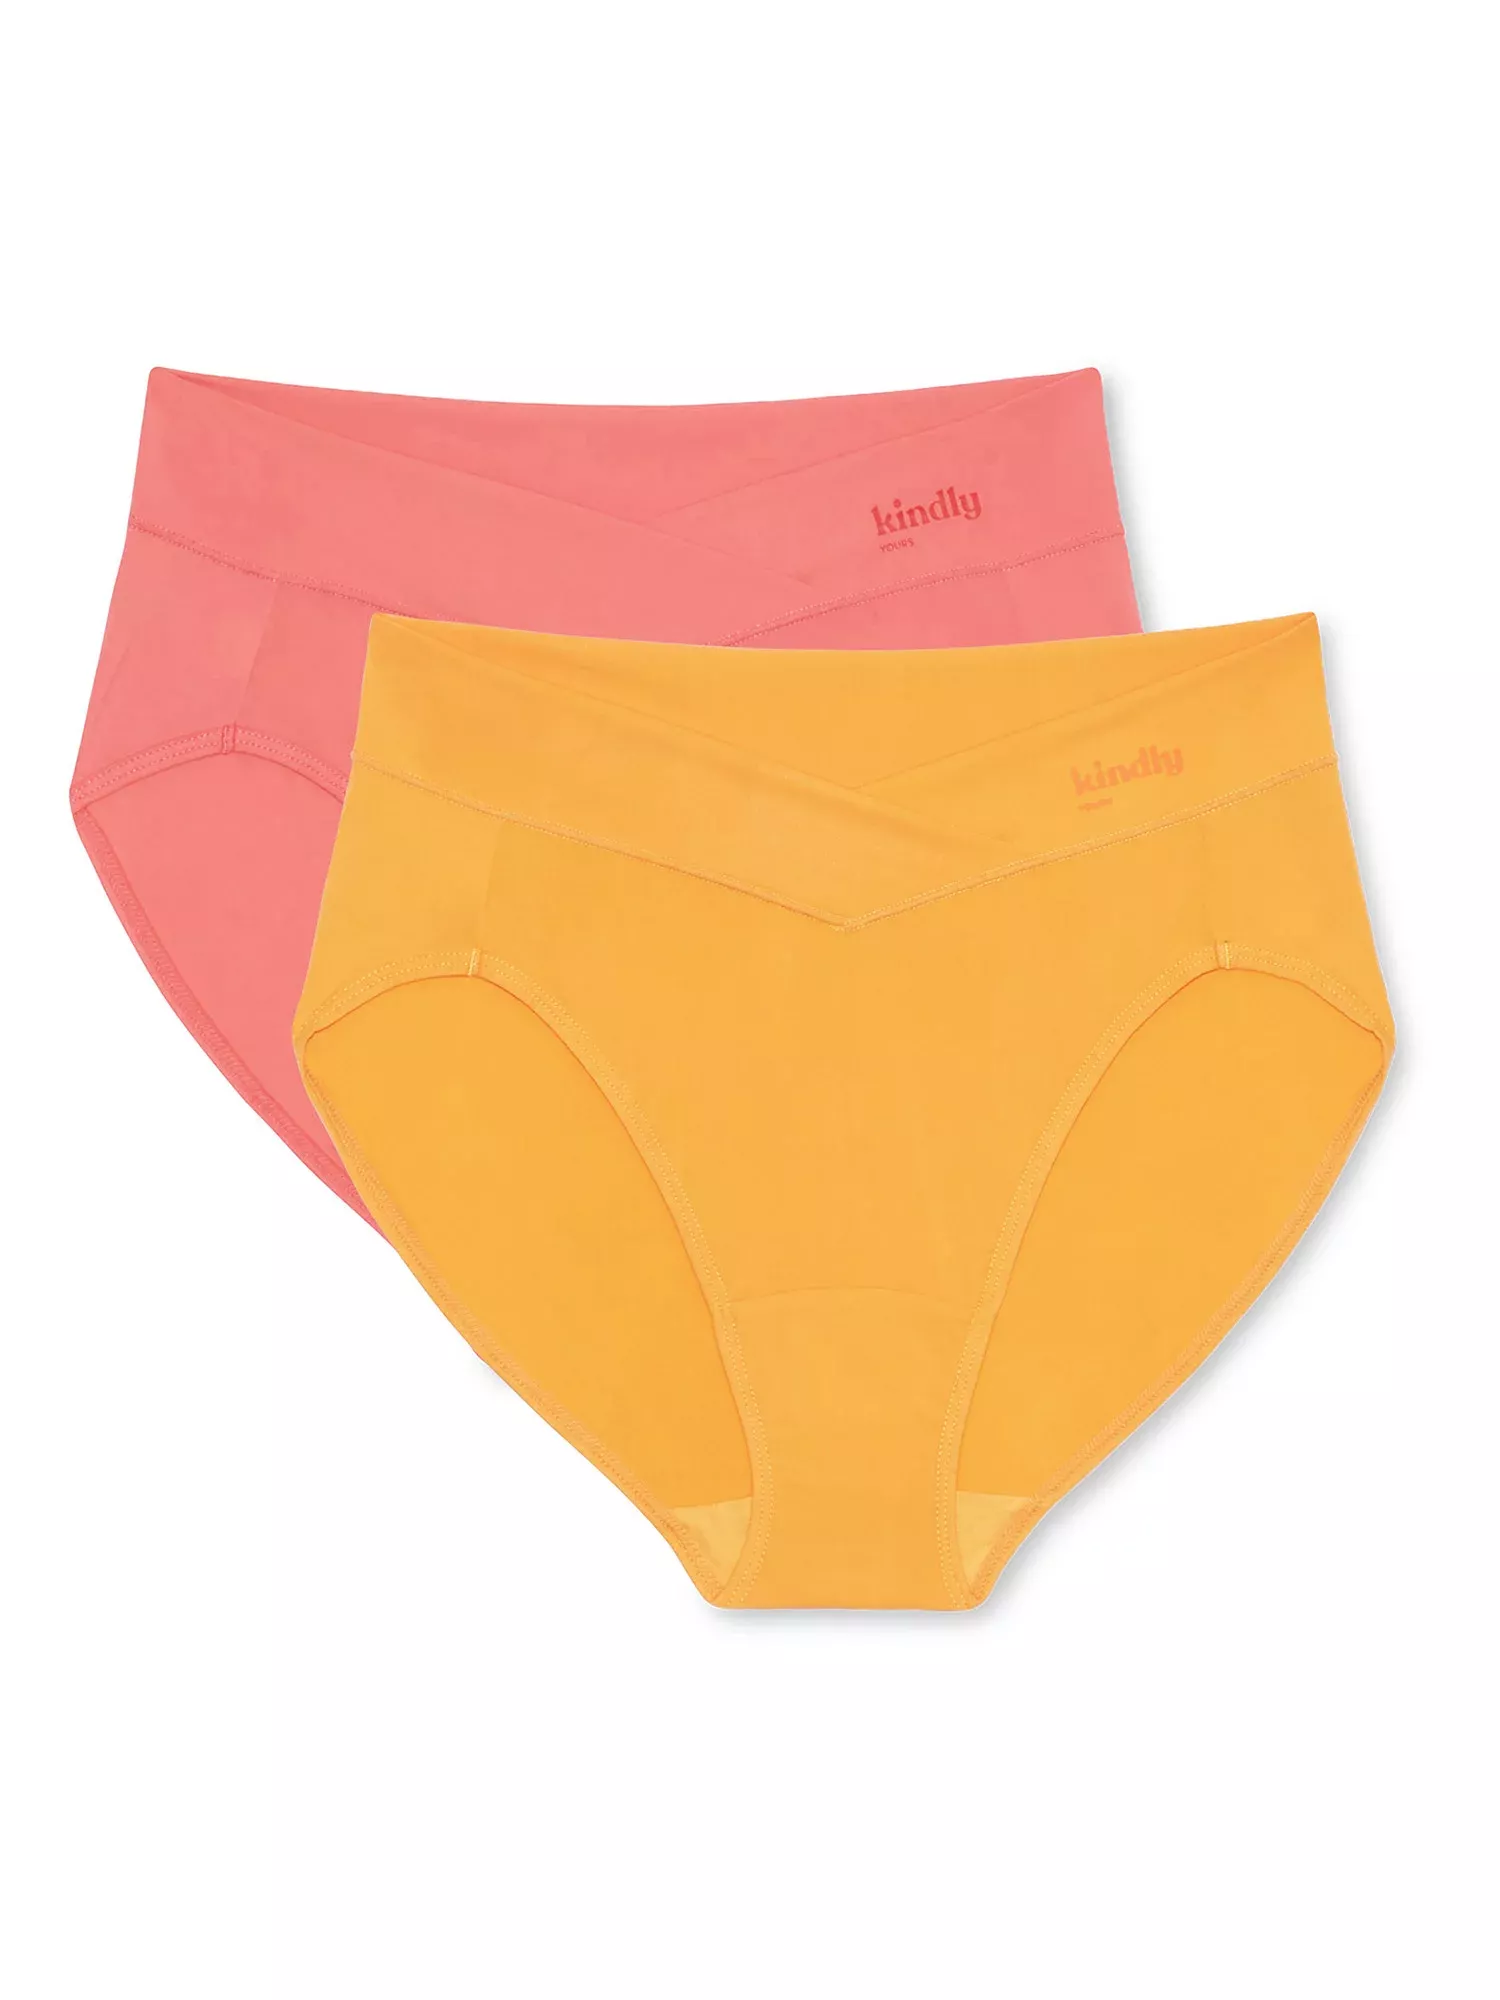  Kindly Panty For Women